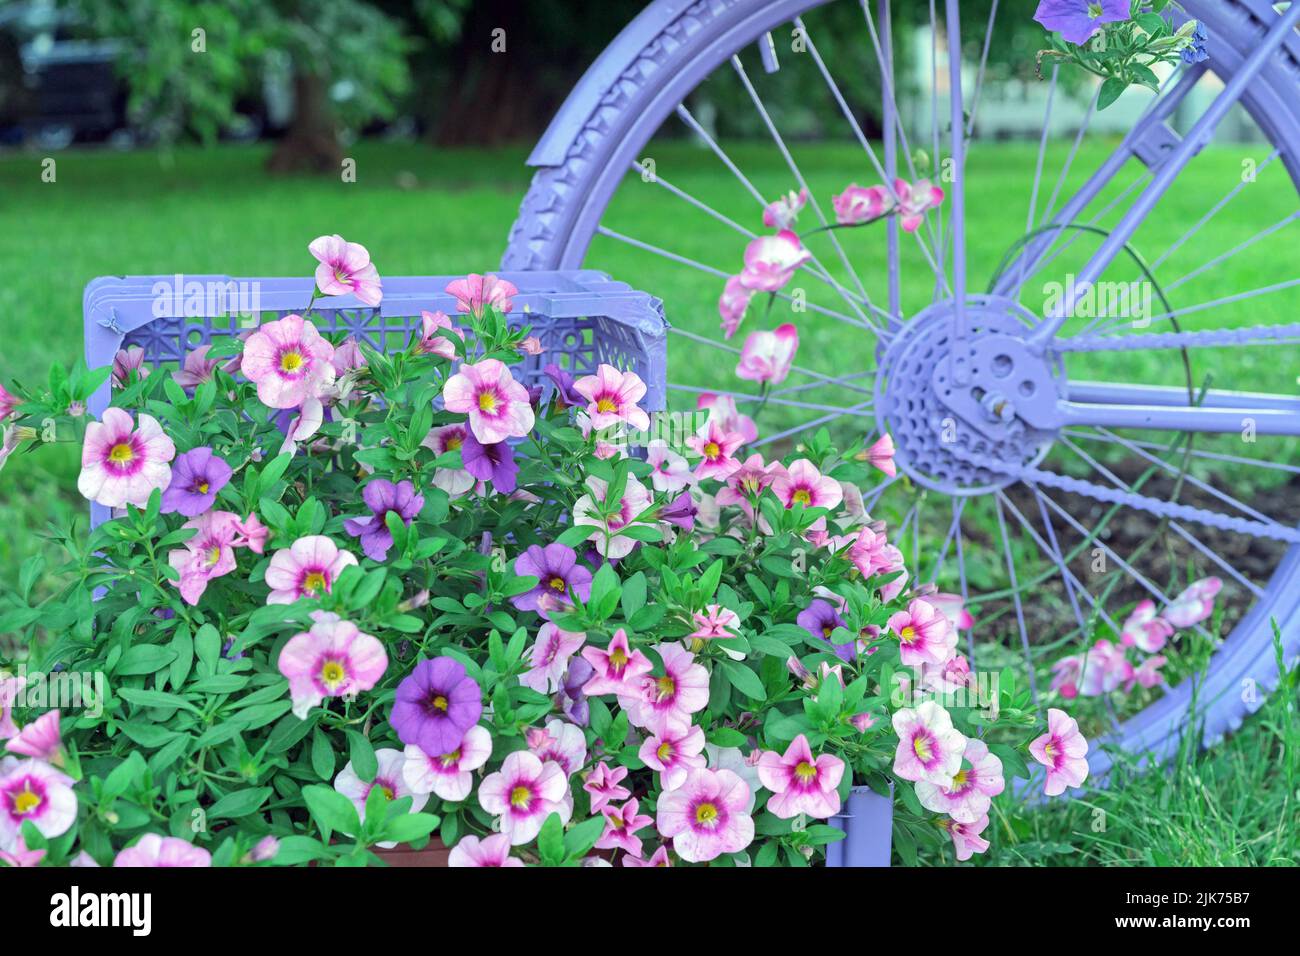 Lilac bicycle decorated with bright flowers in wicker baskets. Flower bike. Bicycle in landscape design. Stock Photo